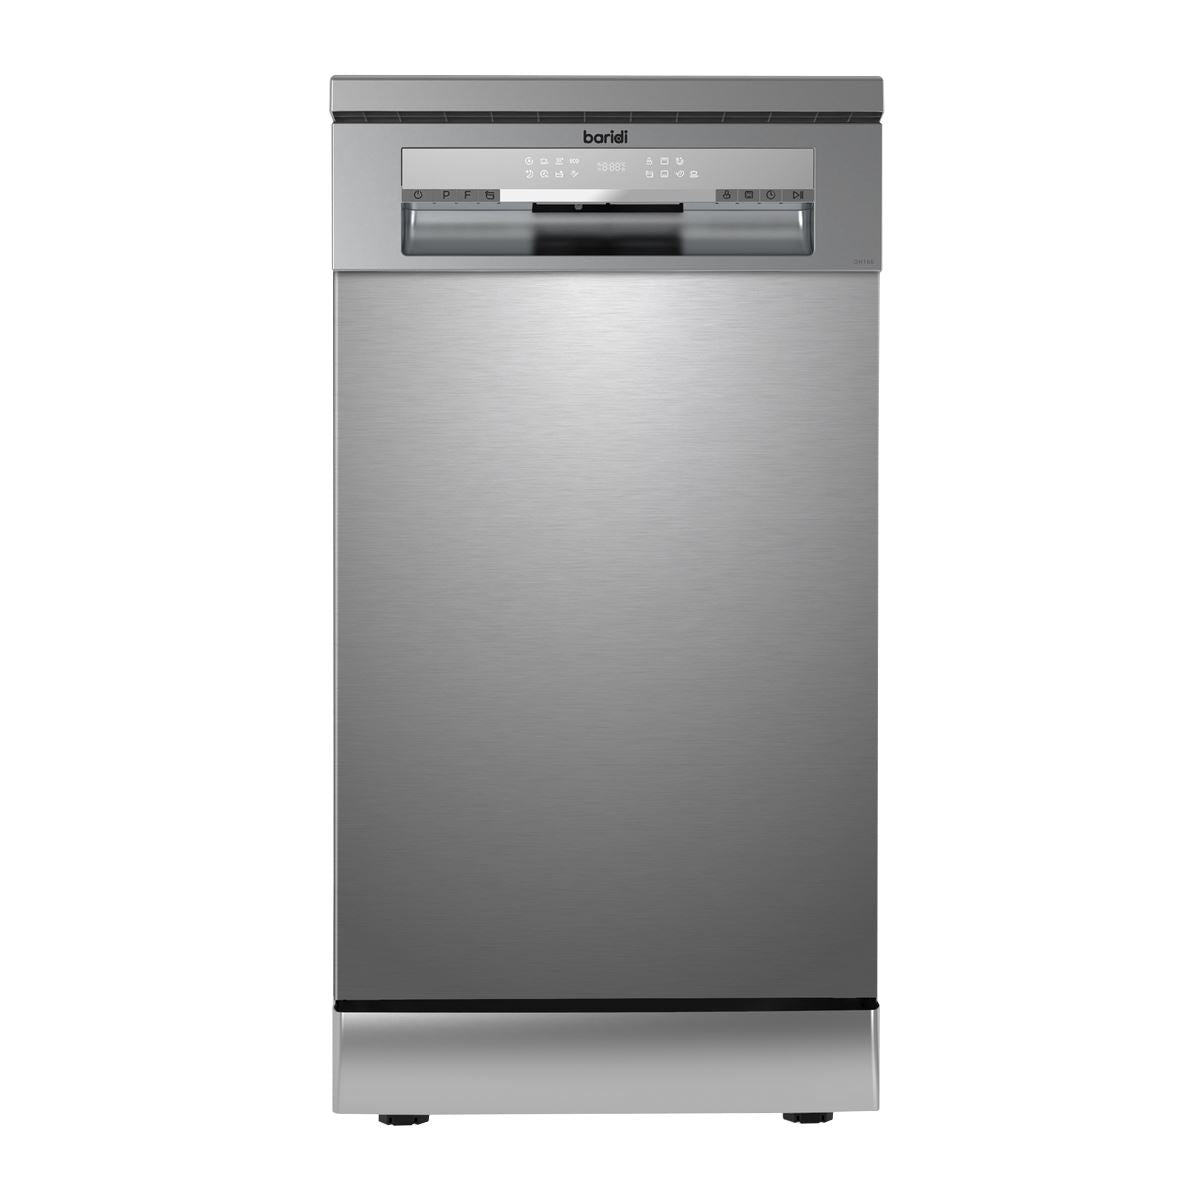 Baridi Slimline Freestanding Dishwasher, 45cm Wide with 10 Place Settings, 8 Programs & 5 Functions, LED Display, Silver